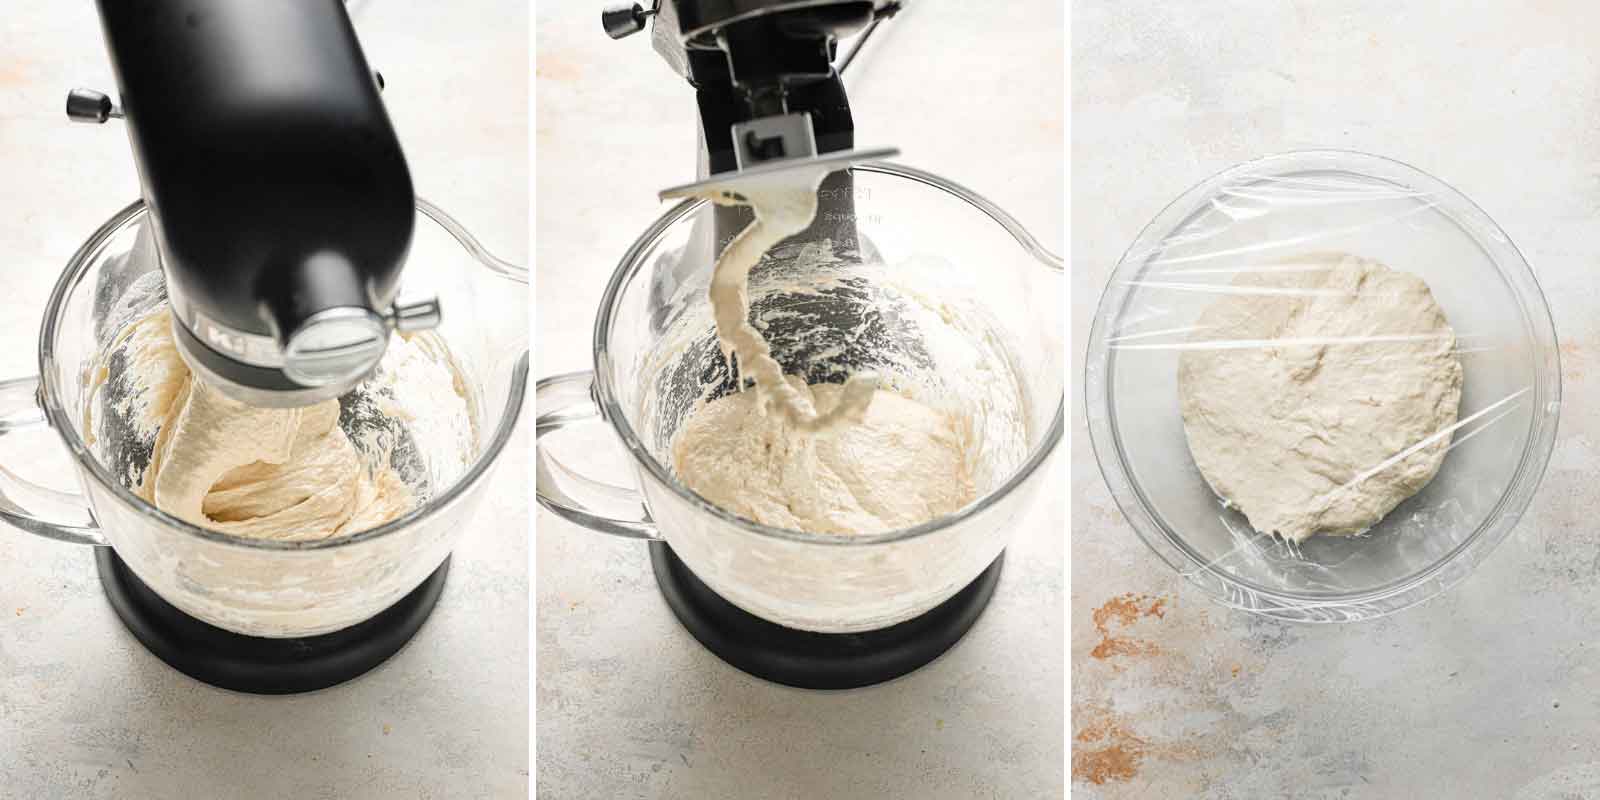 Ciabatta bread dough being kneaded in a stand mixer, then placed in a glass bowl to rise.